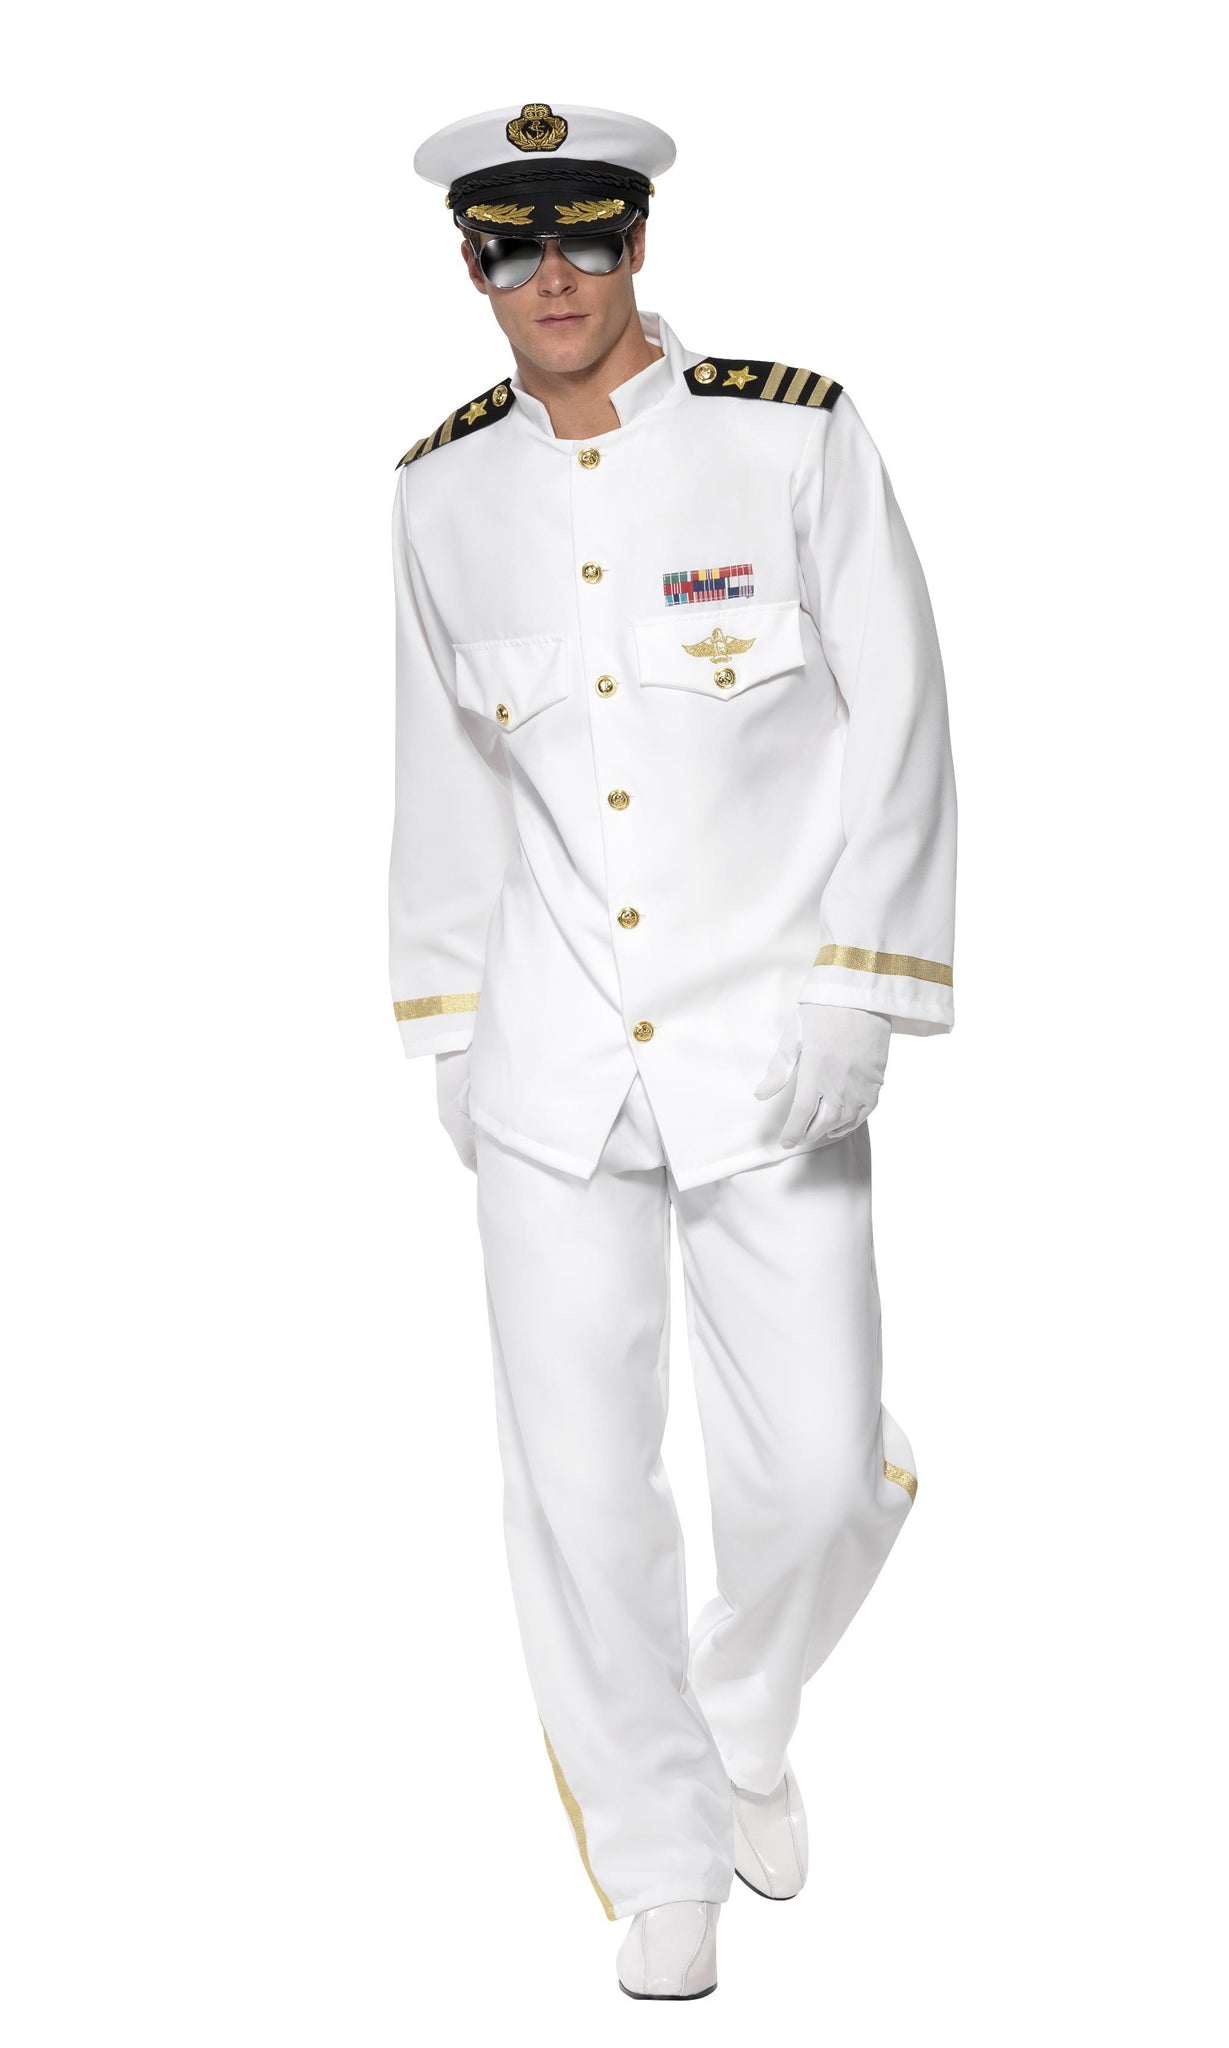 White Navy Captain costume with jacket, pants, hat and gloves